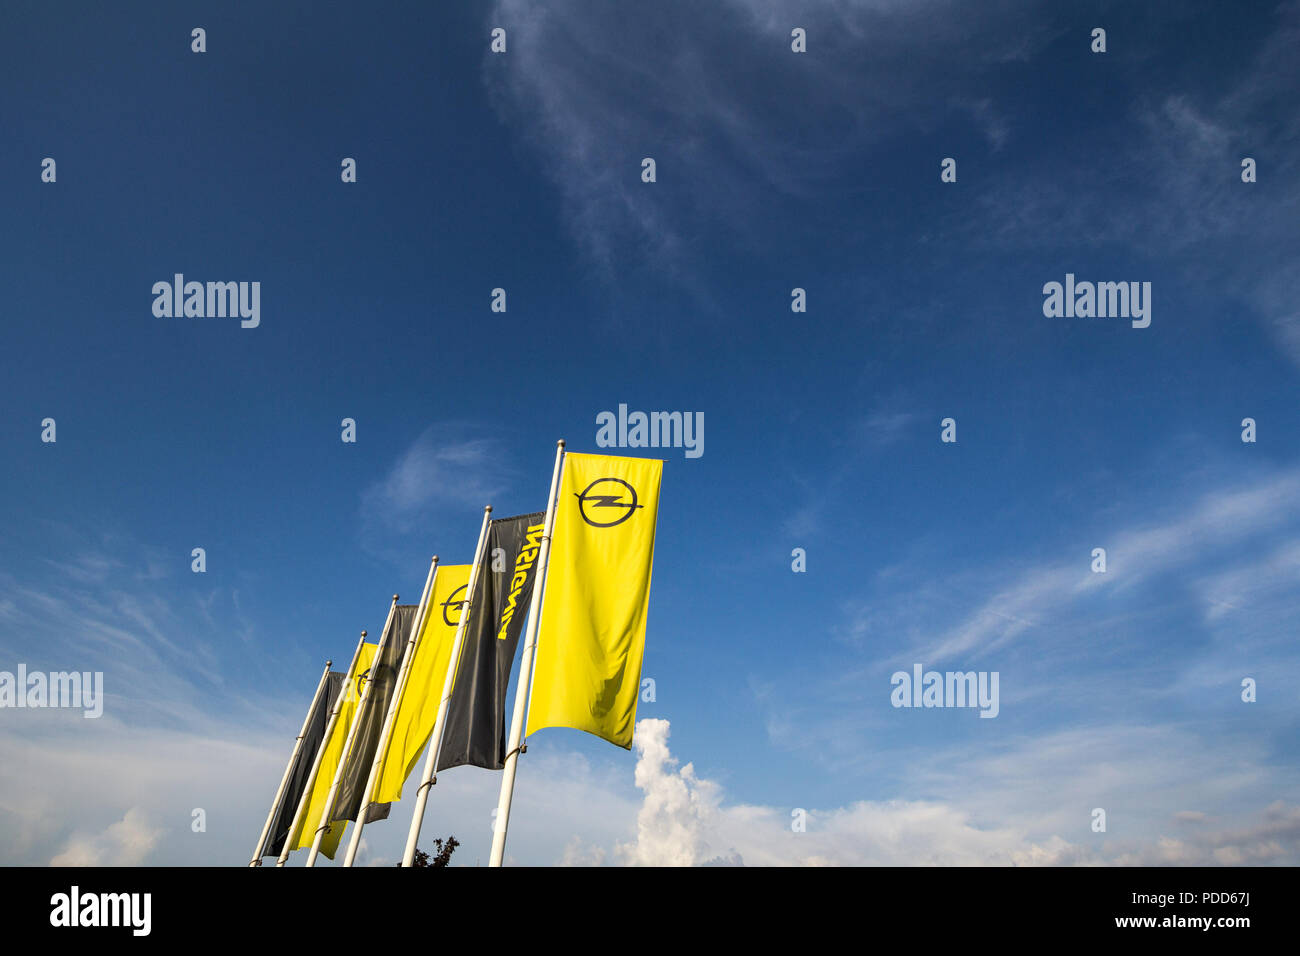 BELGRADE, SERBIA - JULY 29, 2018: Opel logo on their main dealership store Belgrade. Opel is a German car and automotive manufacturer, part of PSA gro Stock Photo